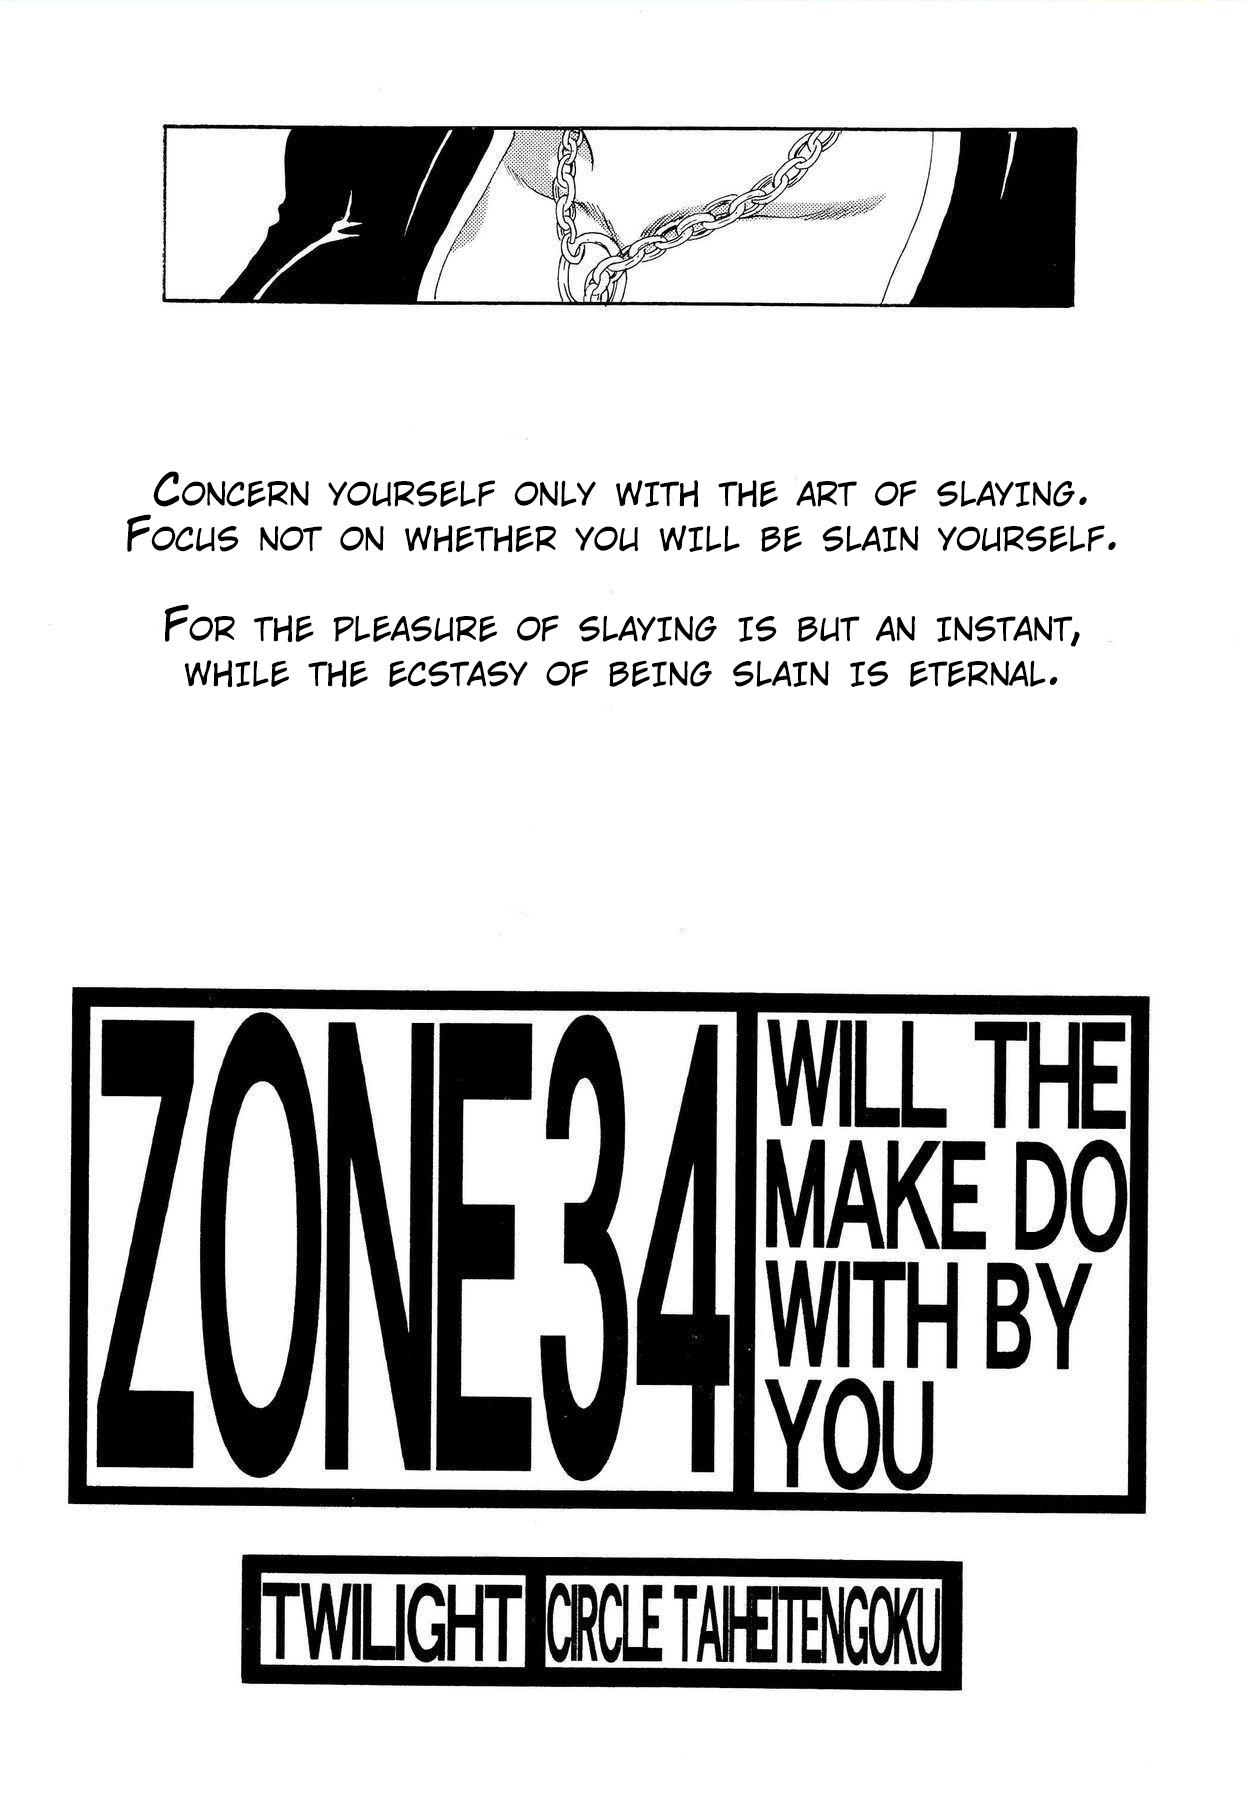 Beard ZONE 34 WILL THE MAKE DO WITH BY YOU - Bleach Polish - Page 3